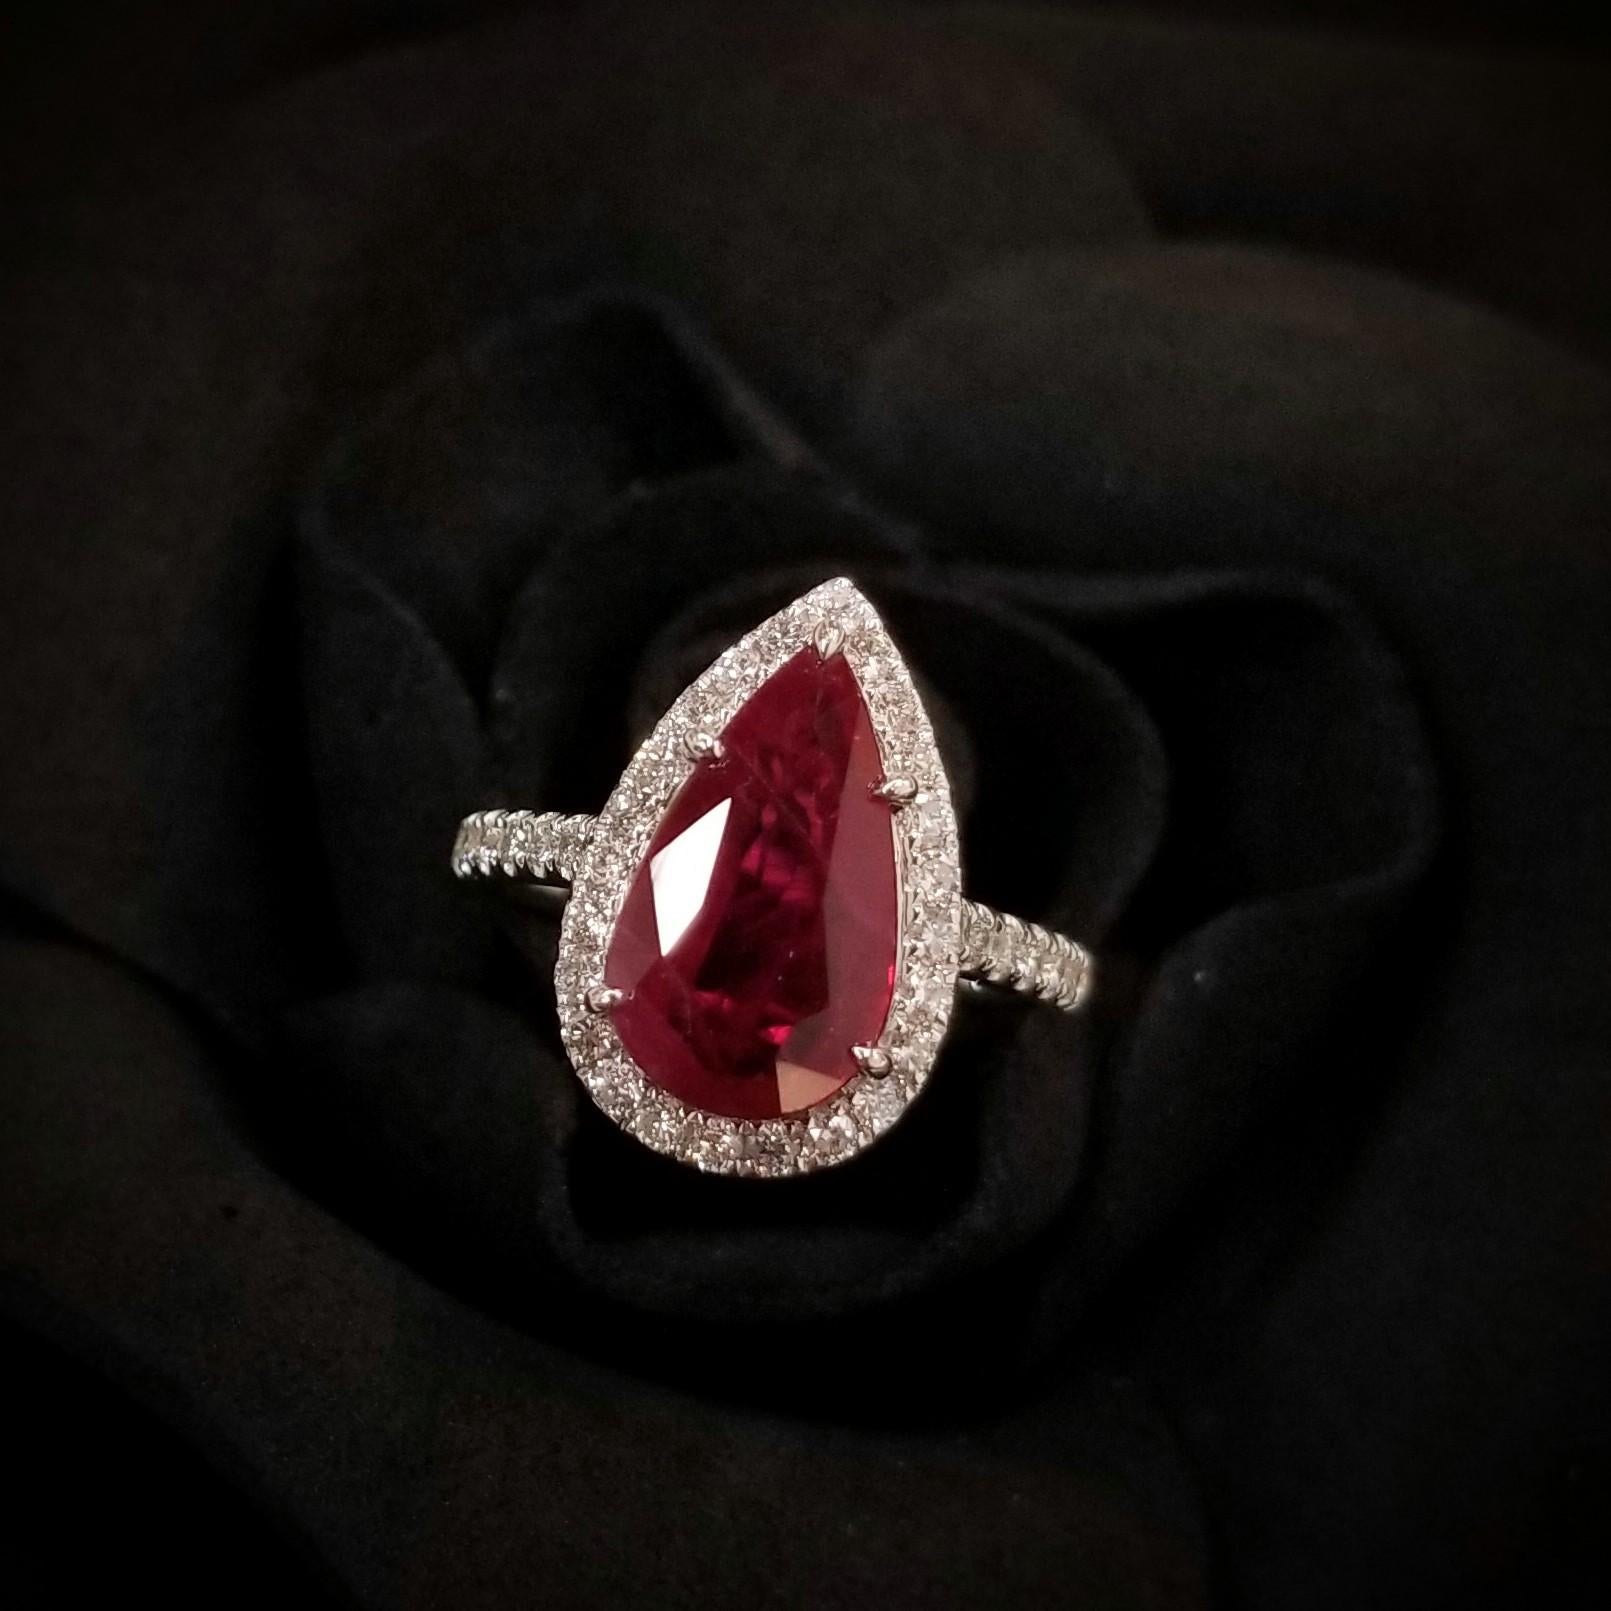 Pear Cut AIG Certified 3.03 Carat Ruby & Diamond Ring in 18K White Gold For Sale